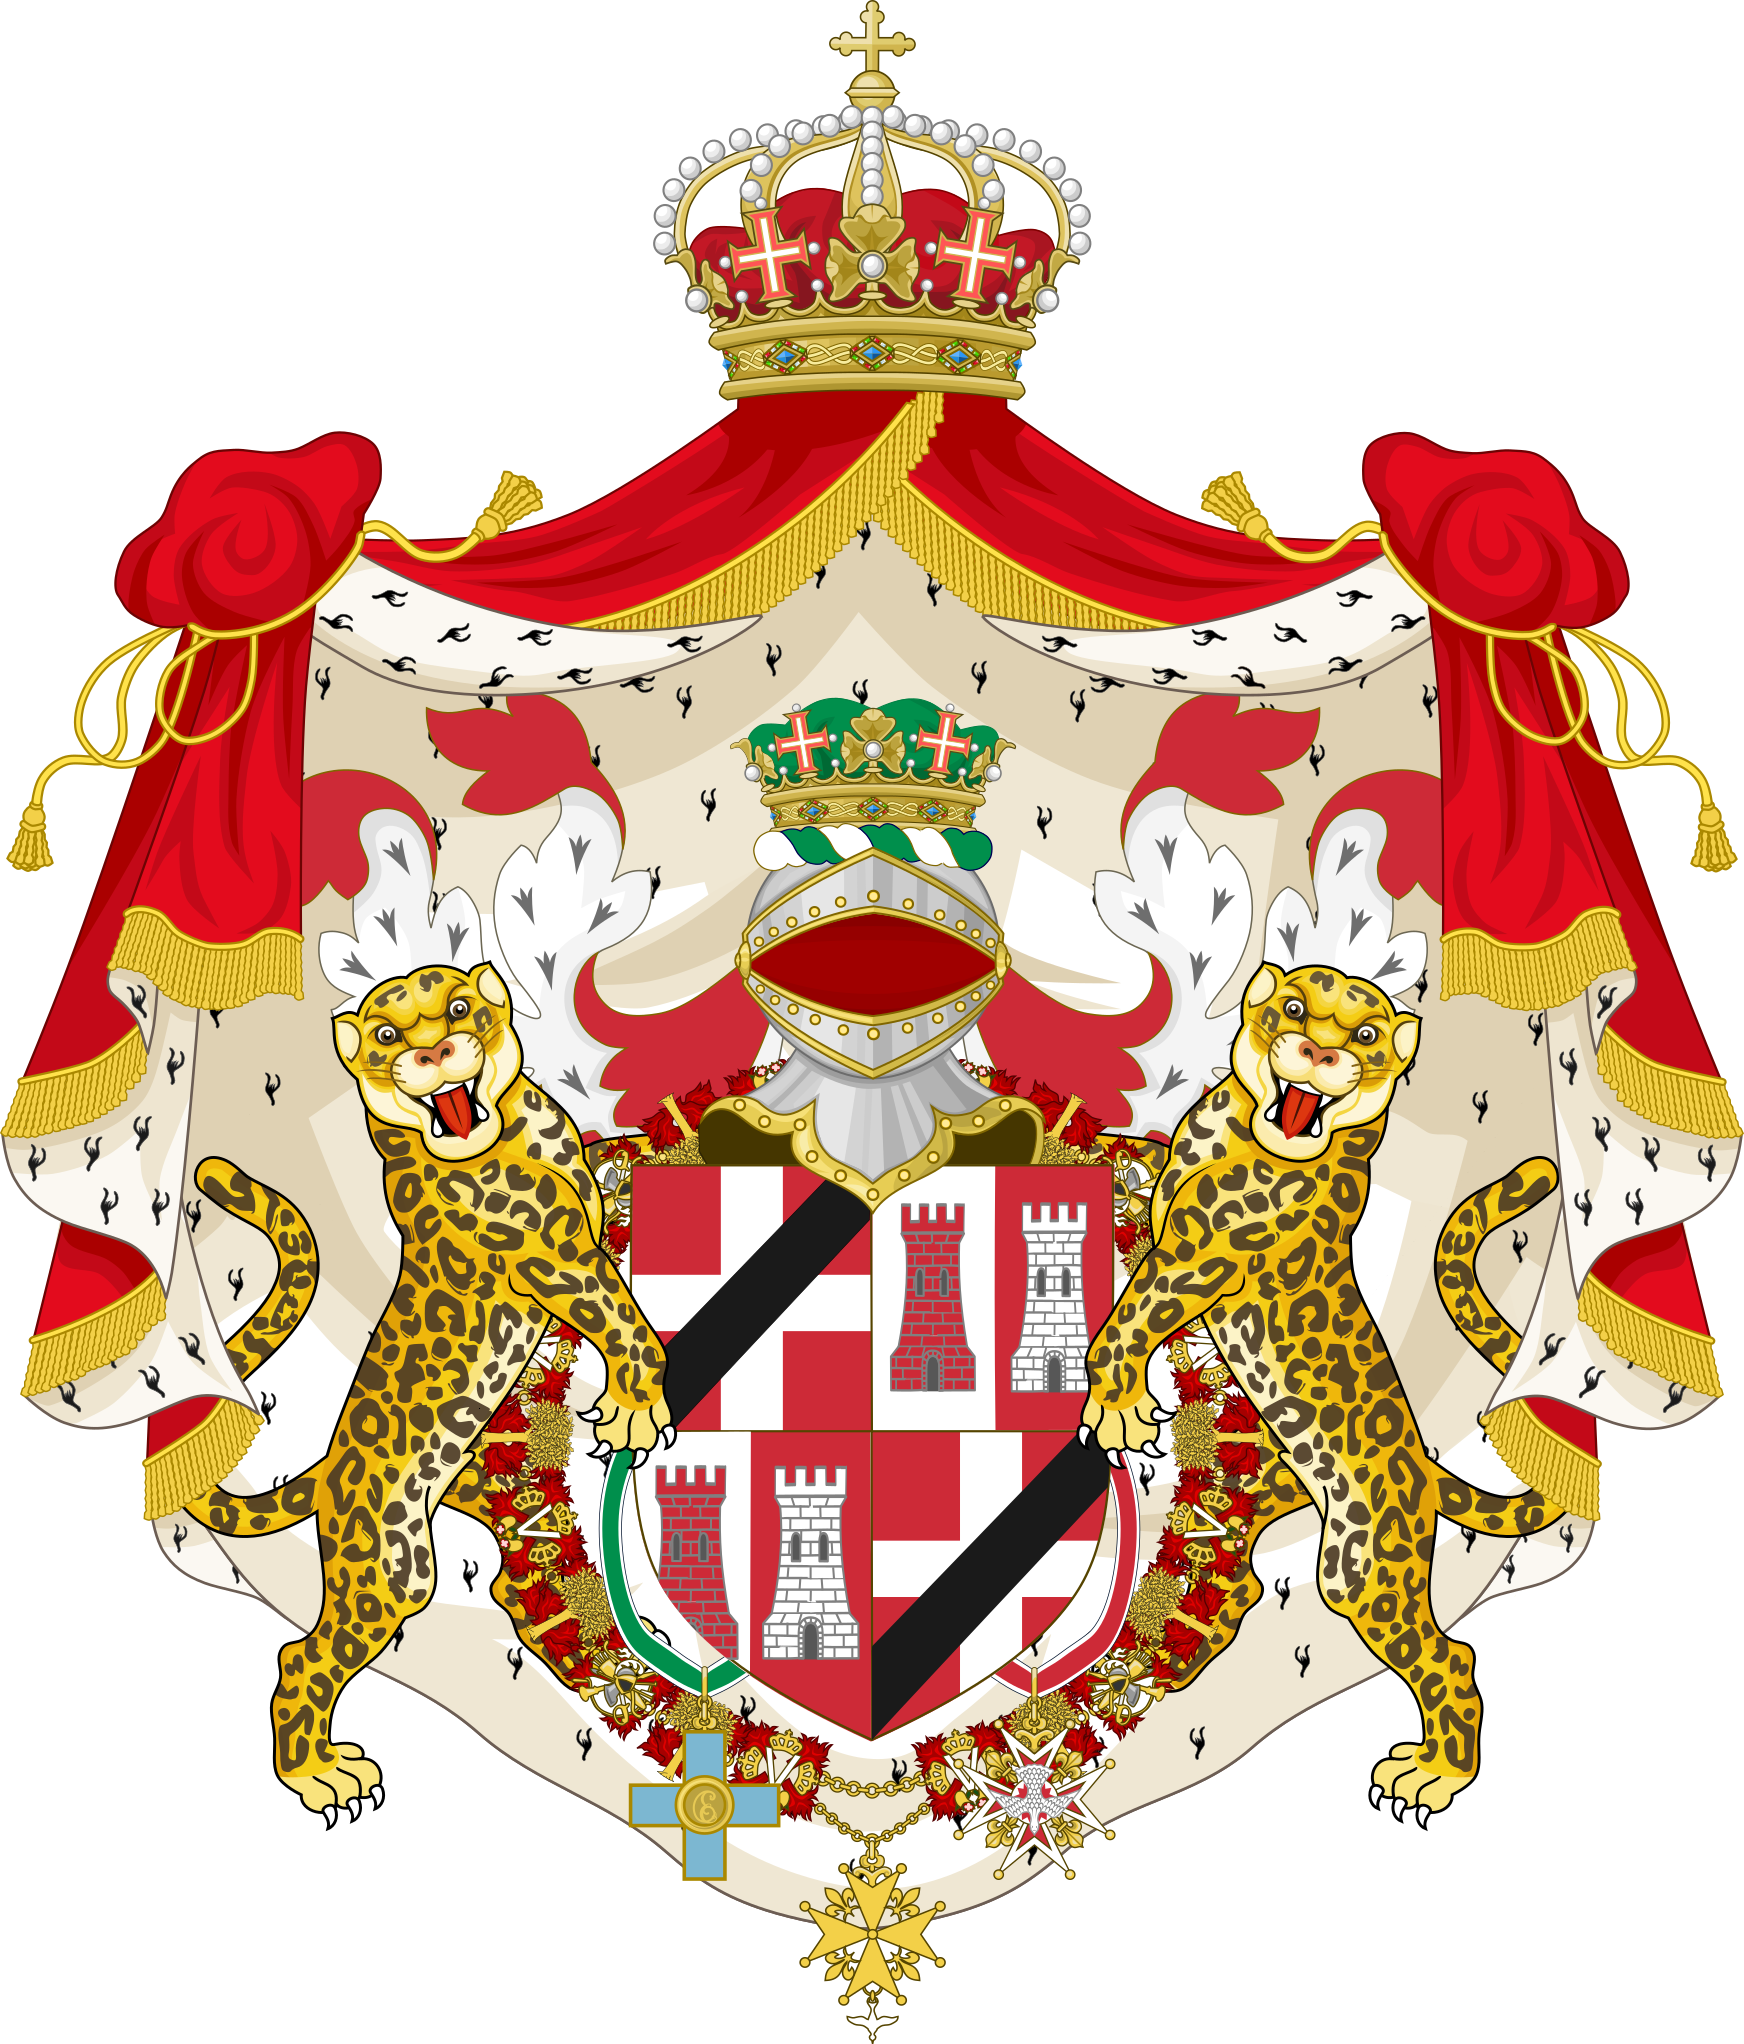 A Coat Of Arms With Cheetahs And A Crown